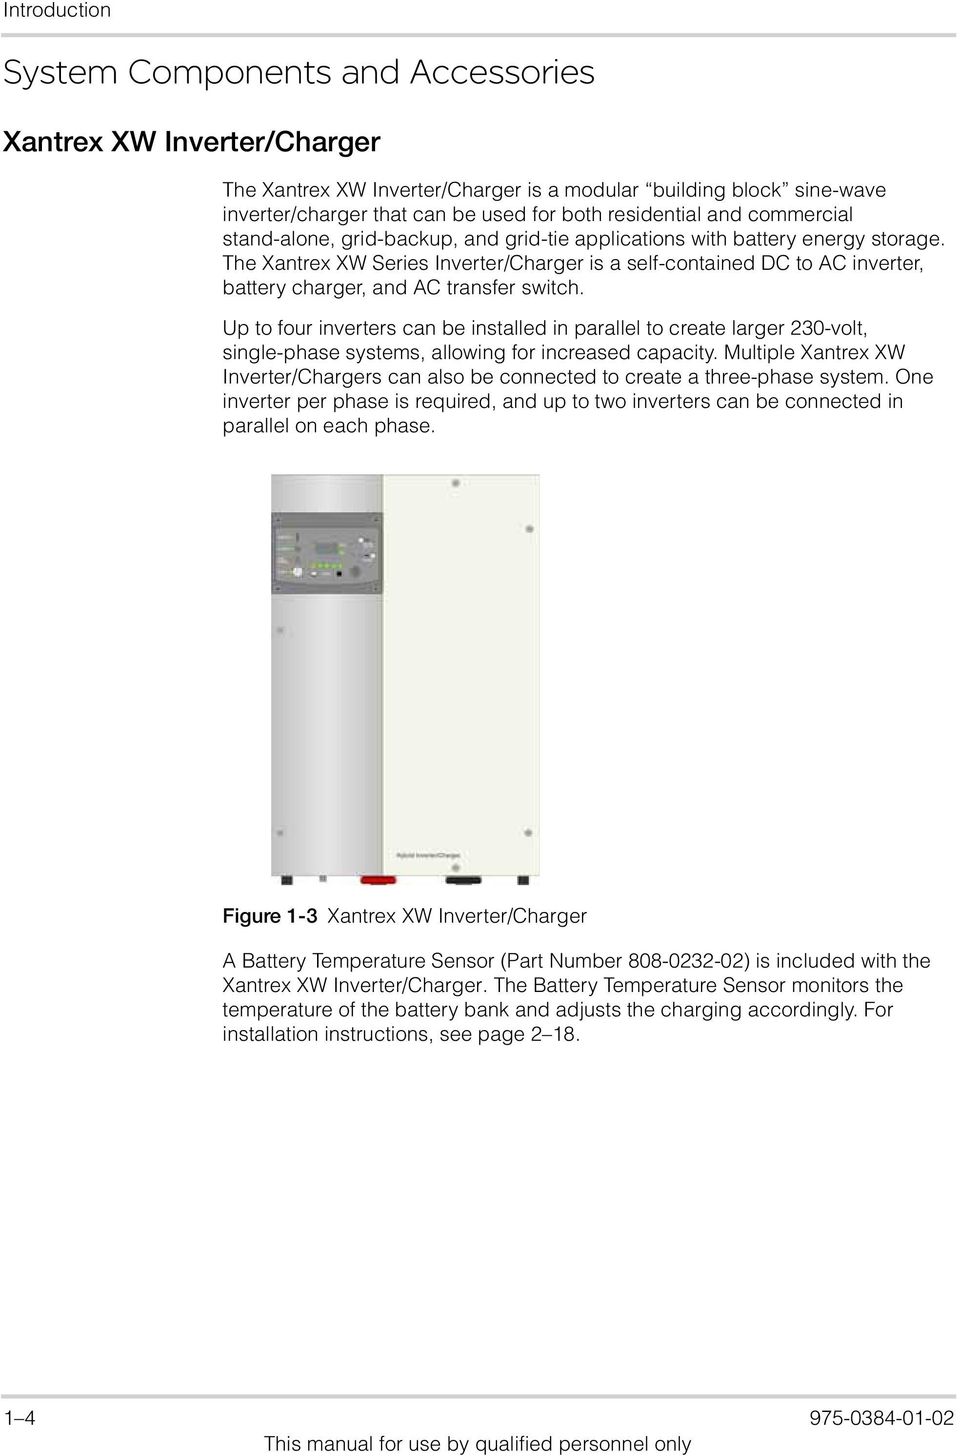 The Xantrex XW Series Inverter/Charger is a self-contained DC to AC inverter, battery charger, and AC transfer switch.